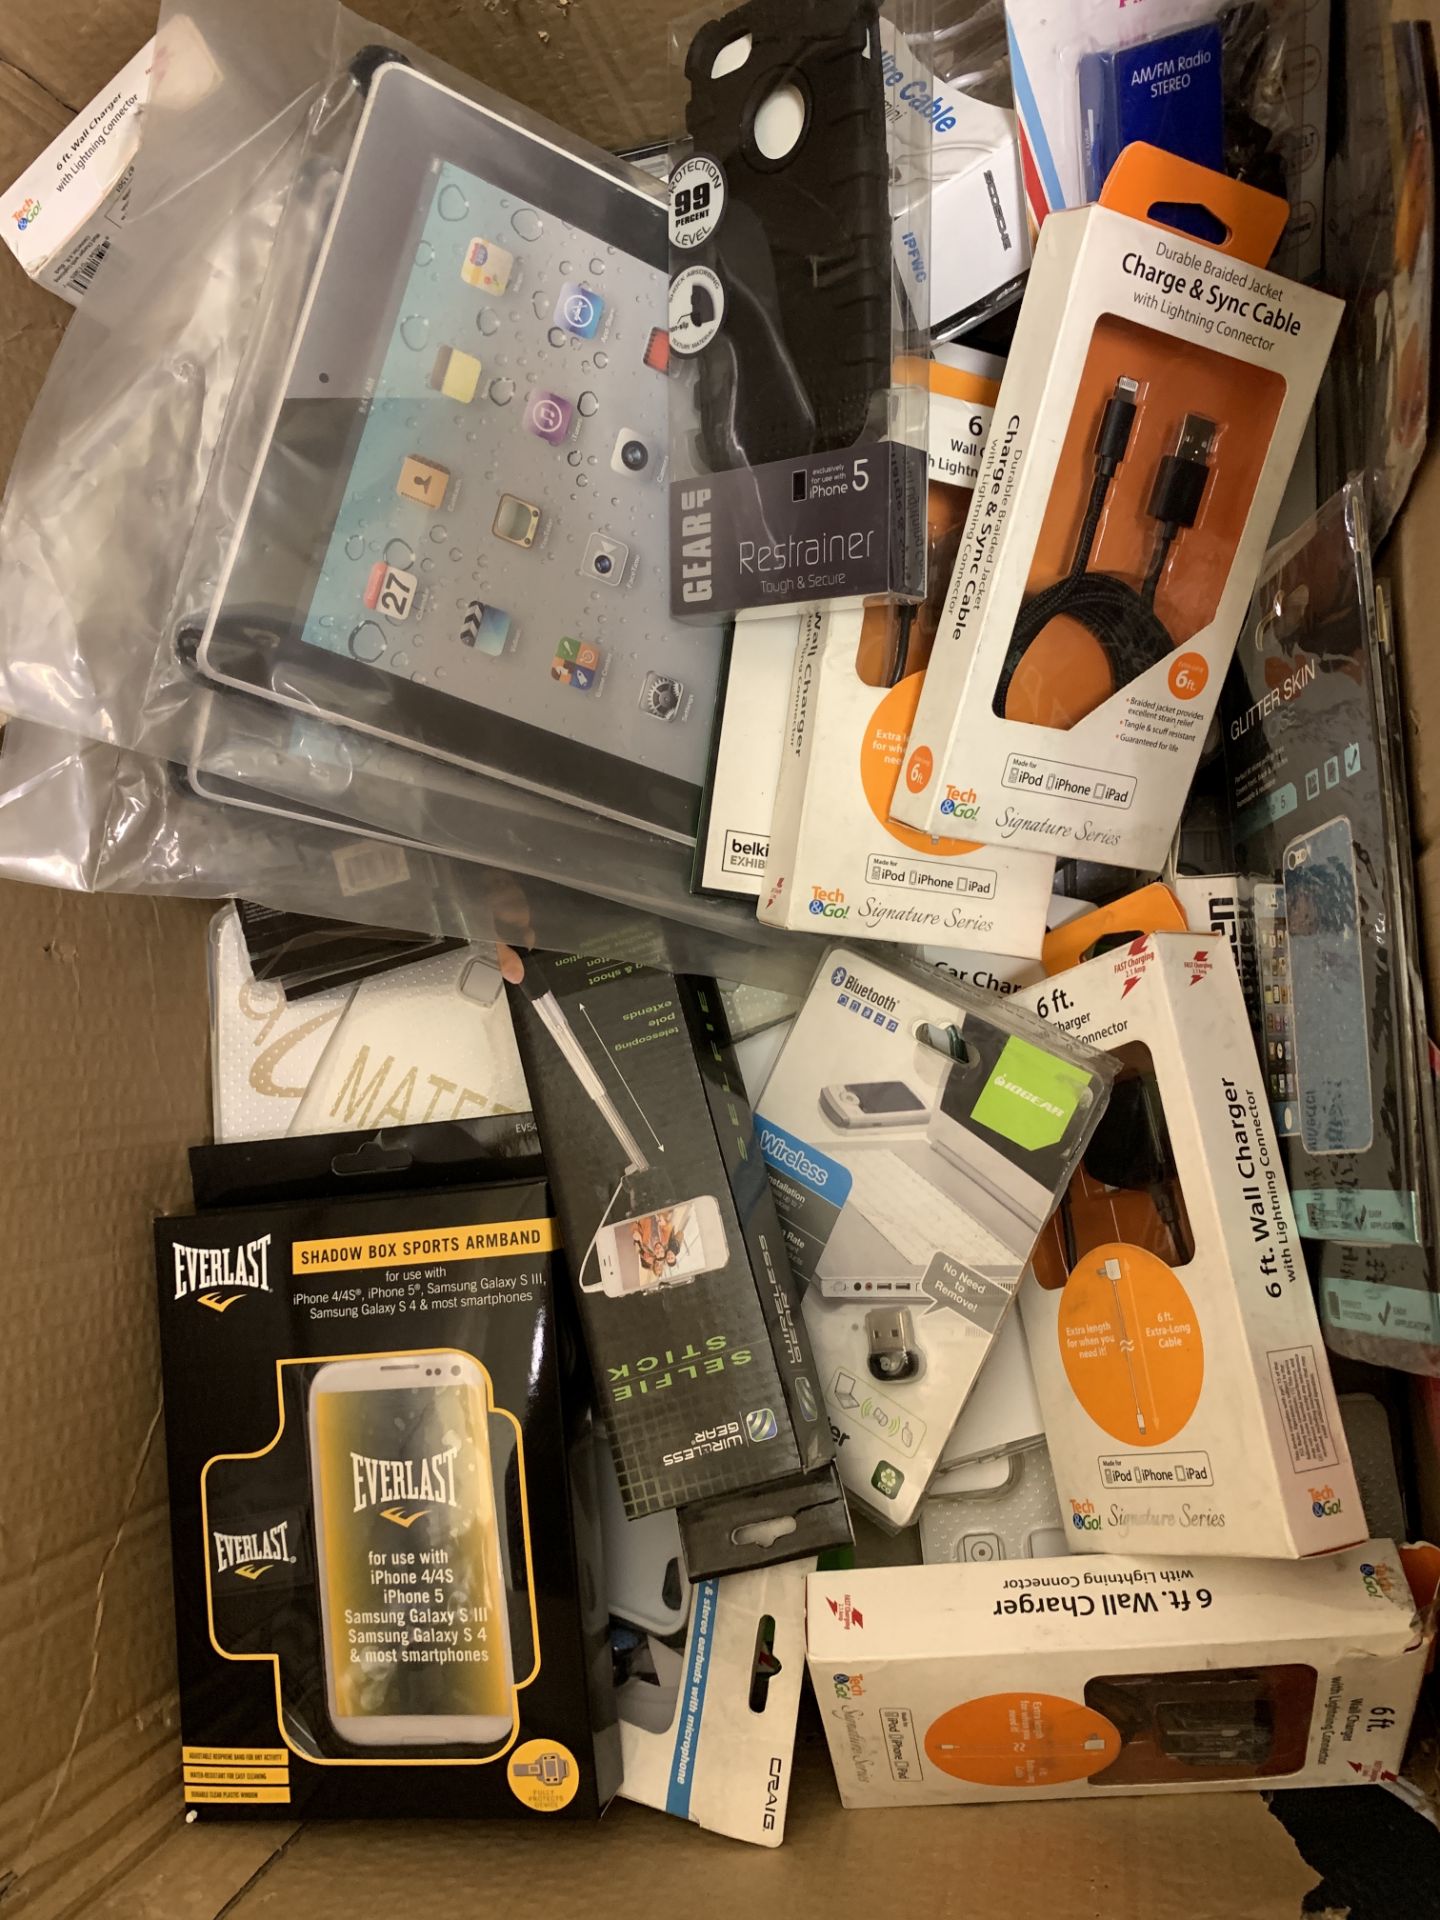 LOT OF MISC CELL PHONE AND ELECTRONICS ACCESSORIES. CASES, CHARGERS, SELFIE STICKS, ETC.